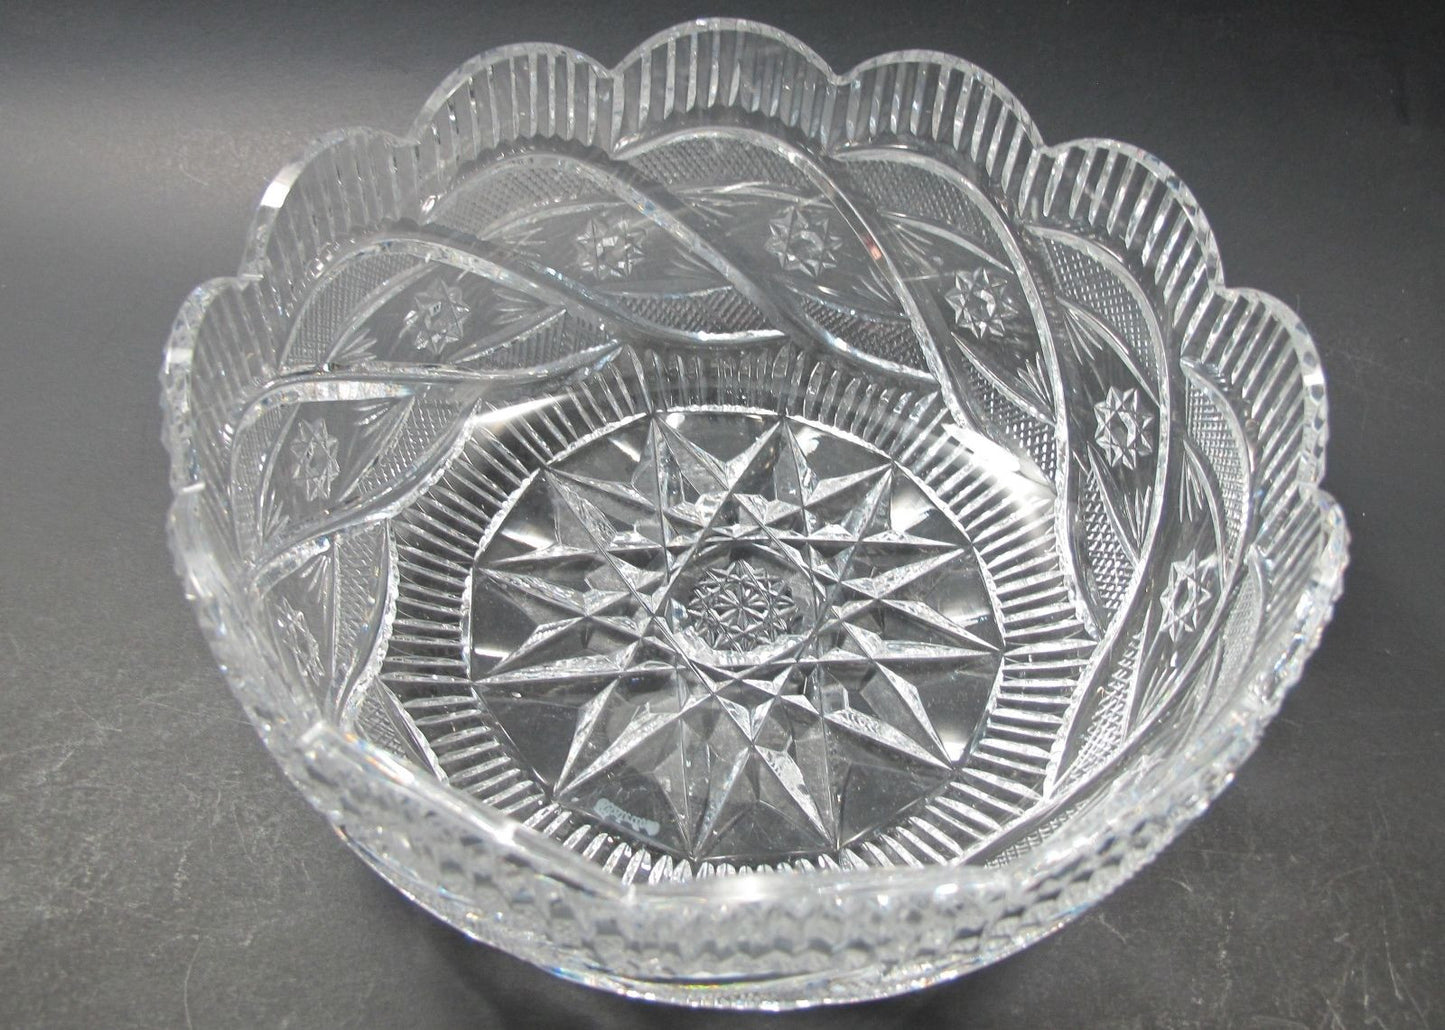 Signed Waterford apprentice bowl Hand cut in Ireland - O'Rourke crystal awards & gifts abp cut glass